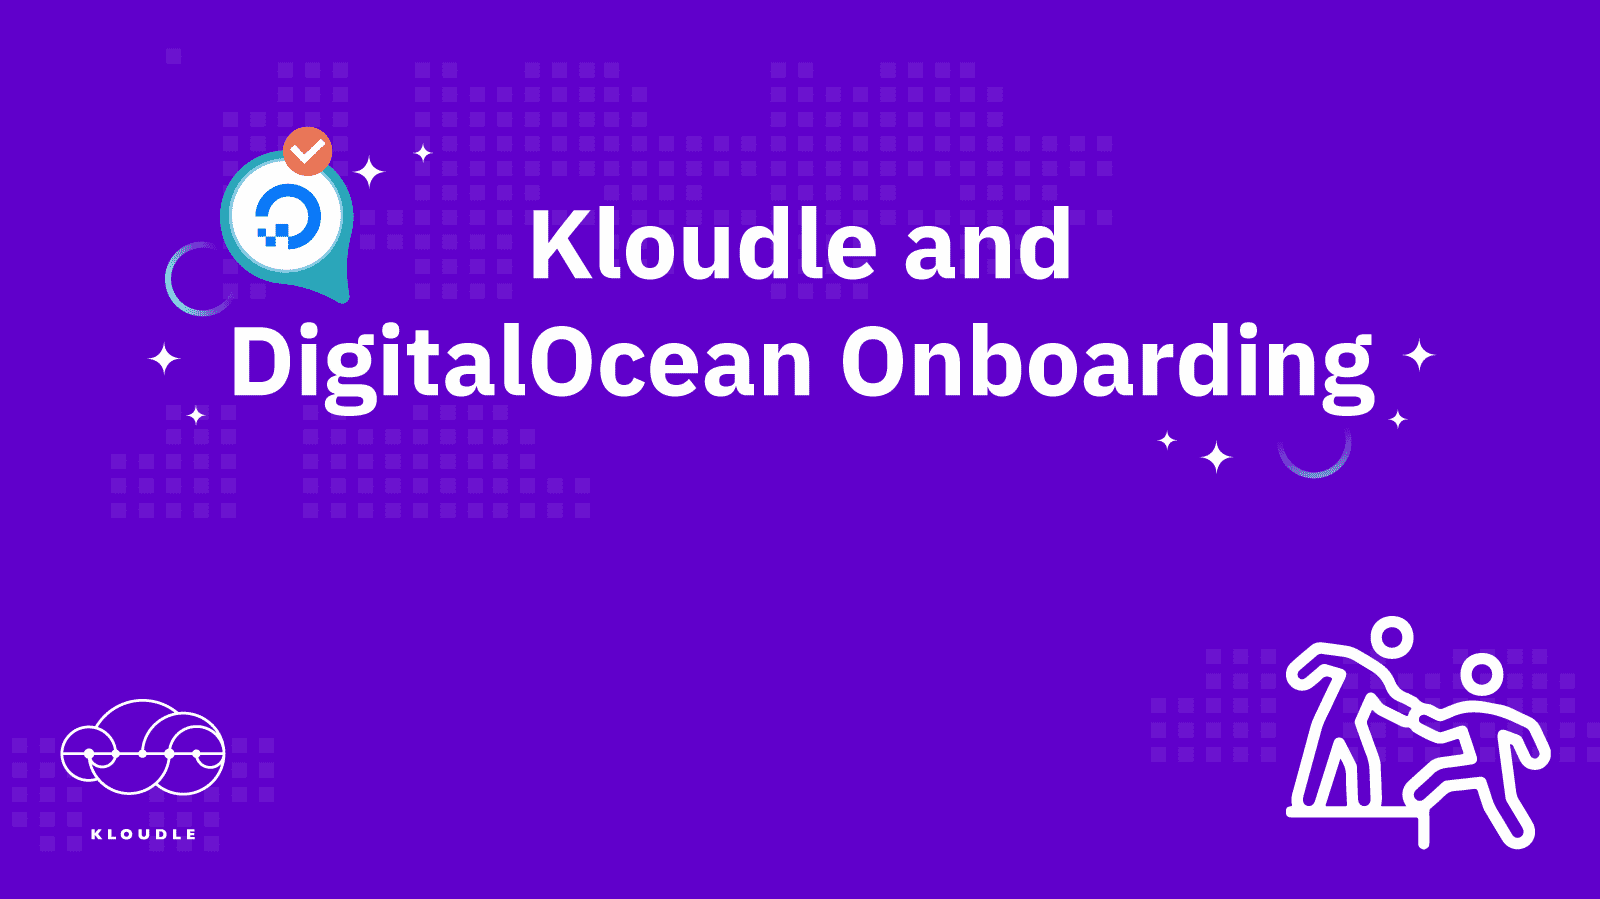 How to onboard DigitalOcean to Kloudle using Automated Onboarding